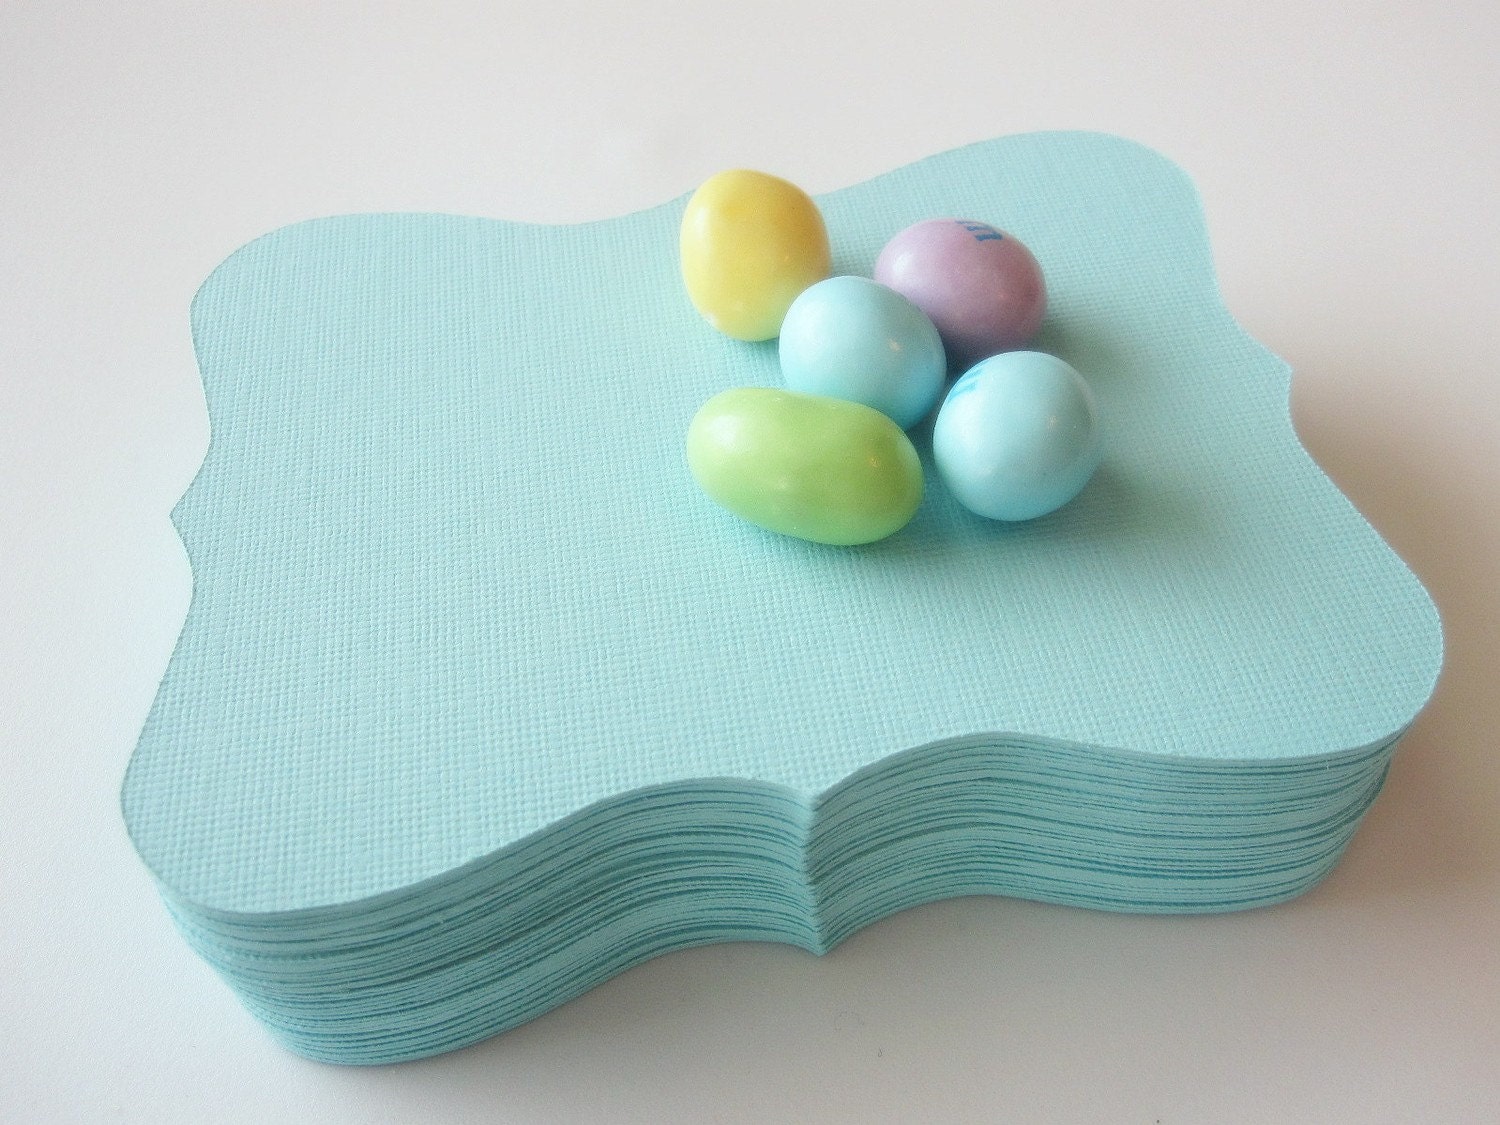 12 candy jar labels , Large Bracket cards (4.5 x 3.5 inches) in Teal Textured Cardstock